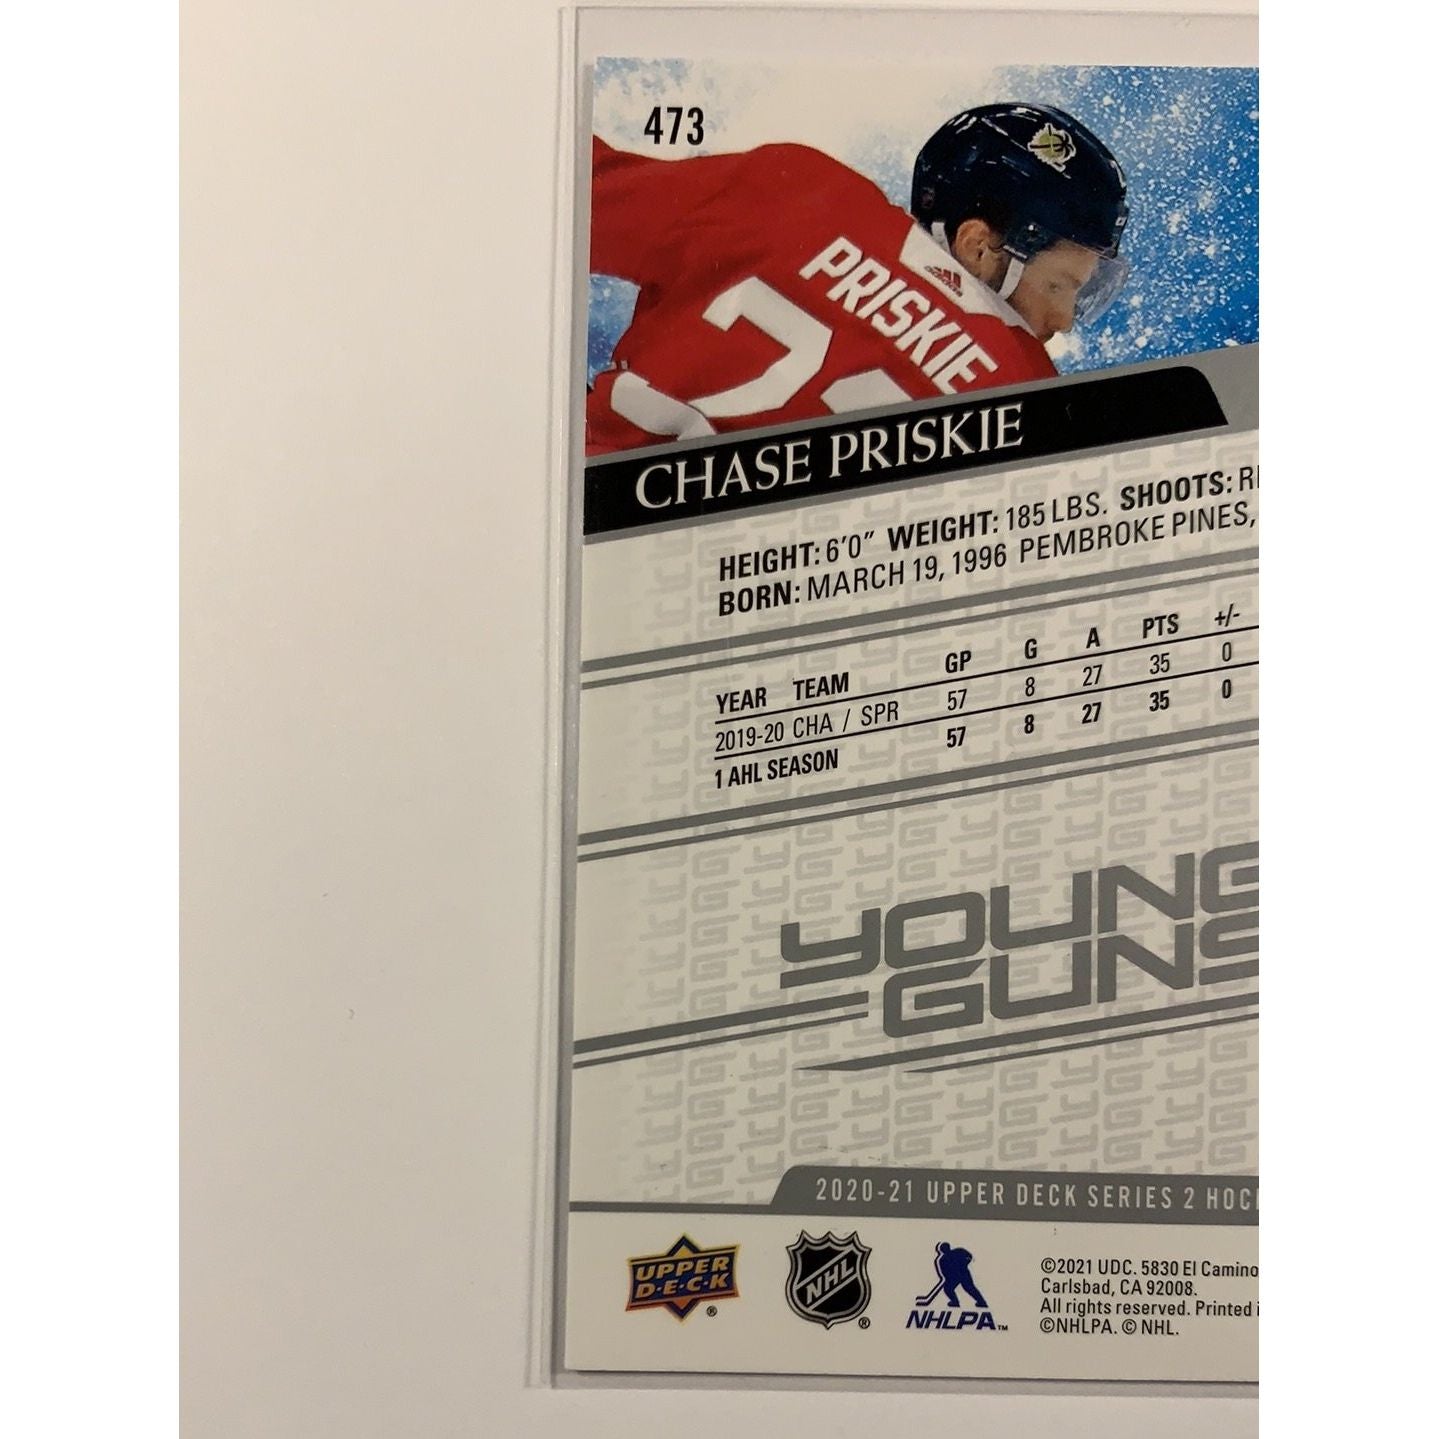  2020-21 Upper Deck Series 2 Chase Priskie Young Guns  Local Legends Cards & Collectibles